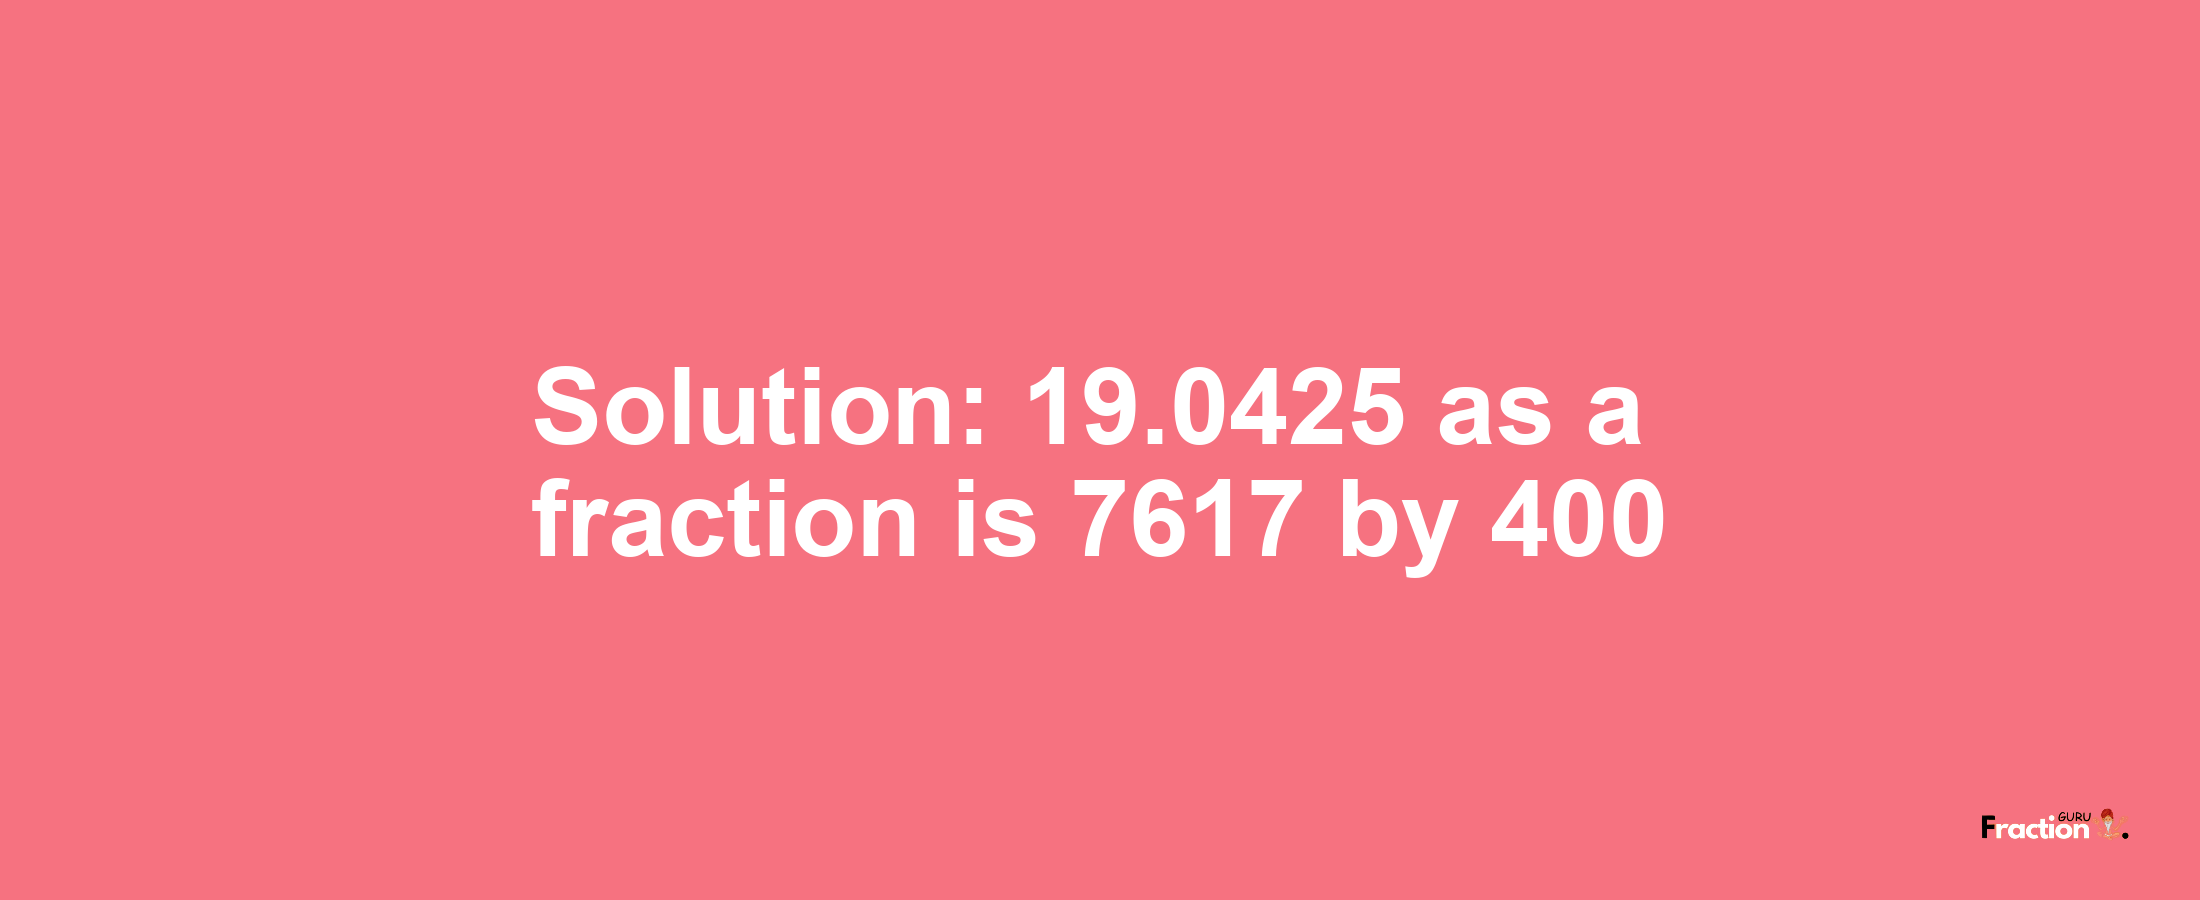 Solution:19.0425 as a fraction is 7617/400